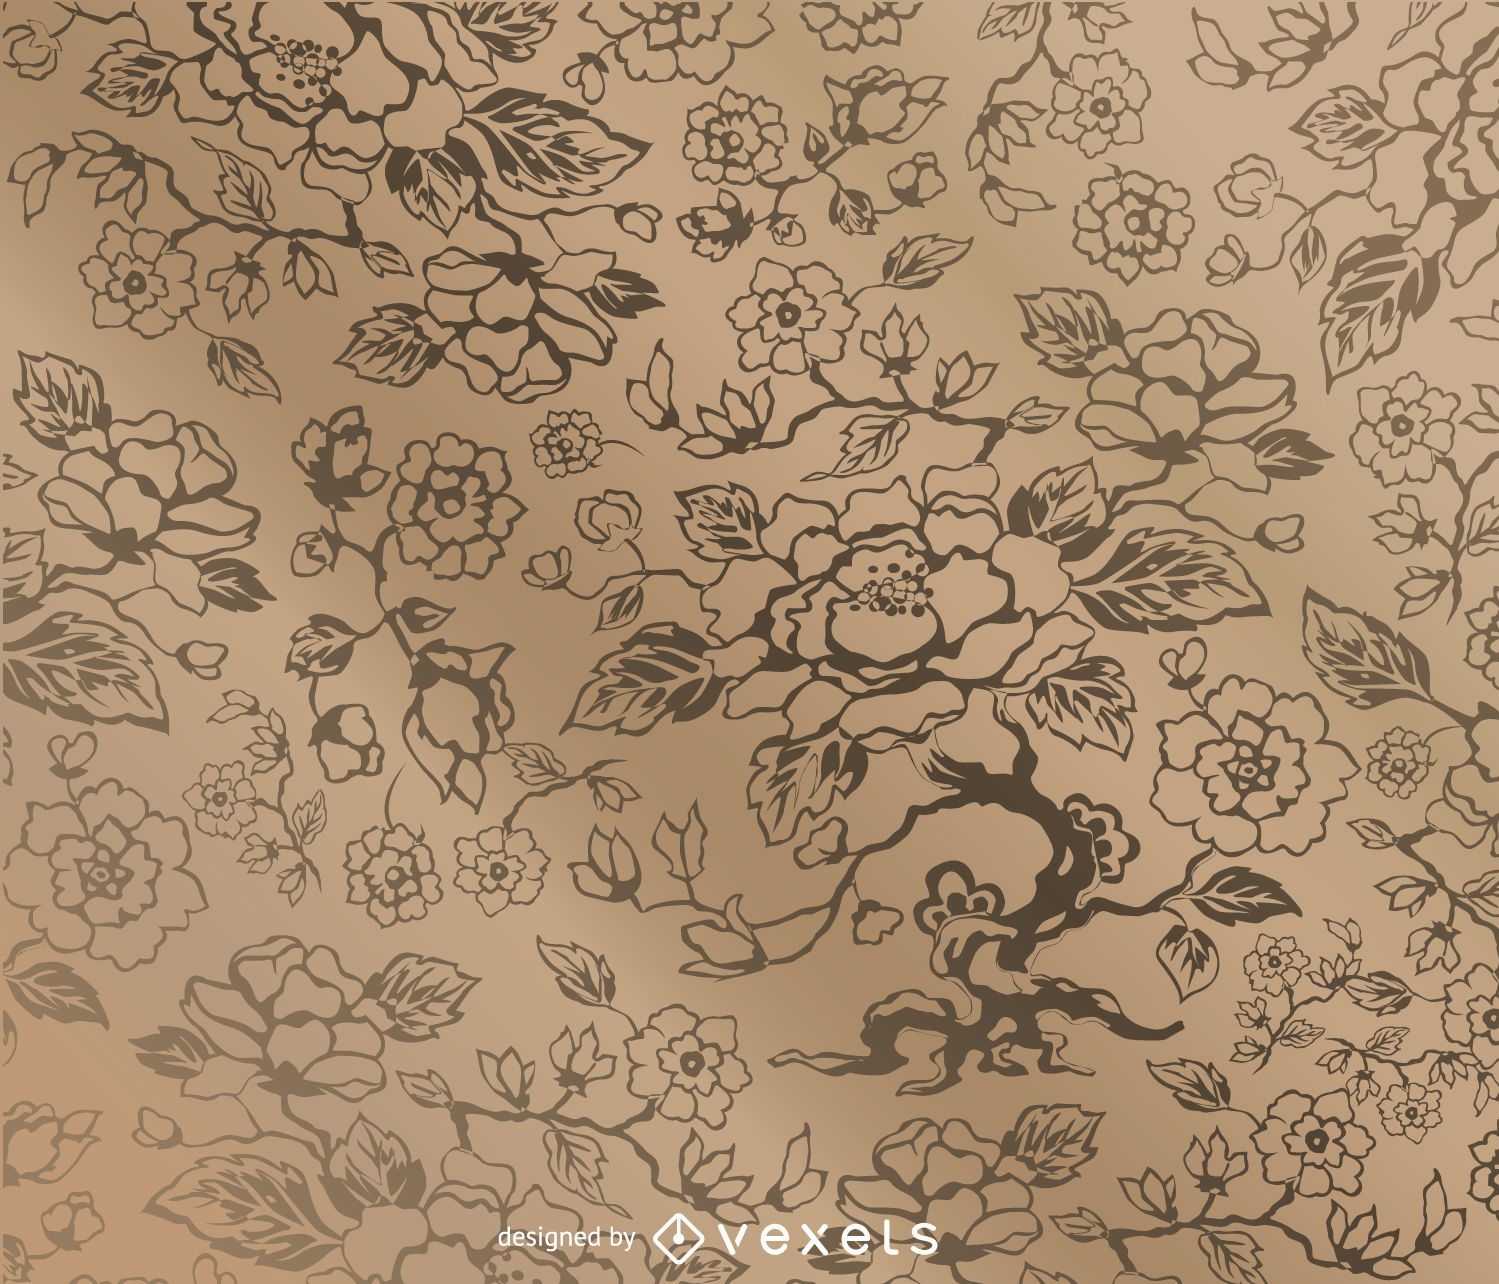 Floral vintage pattern with textures